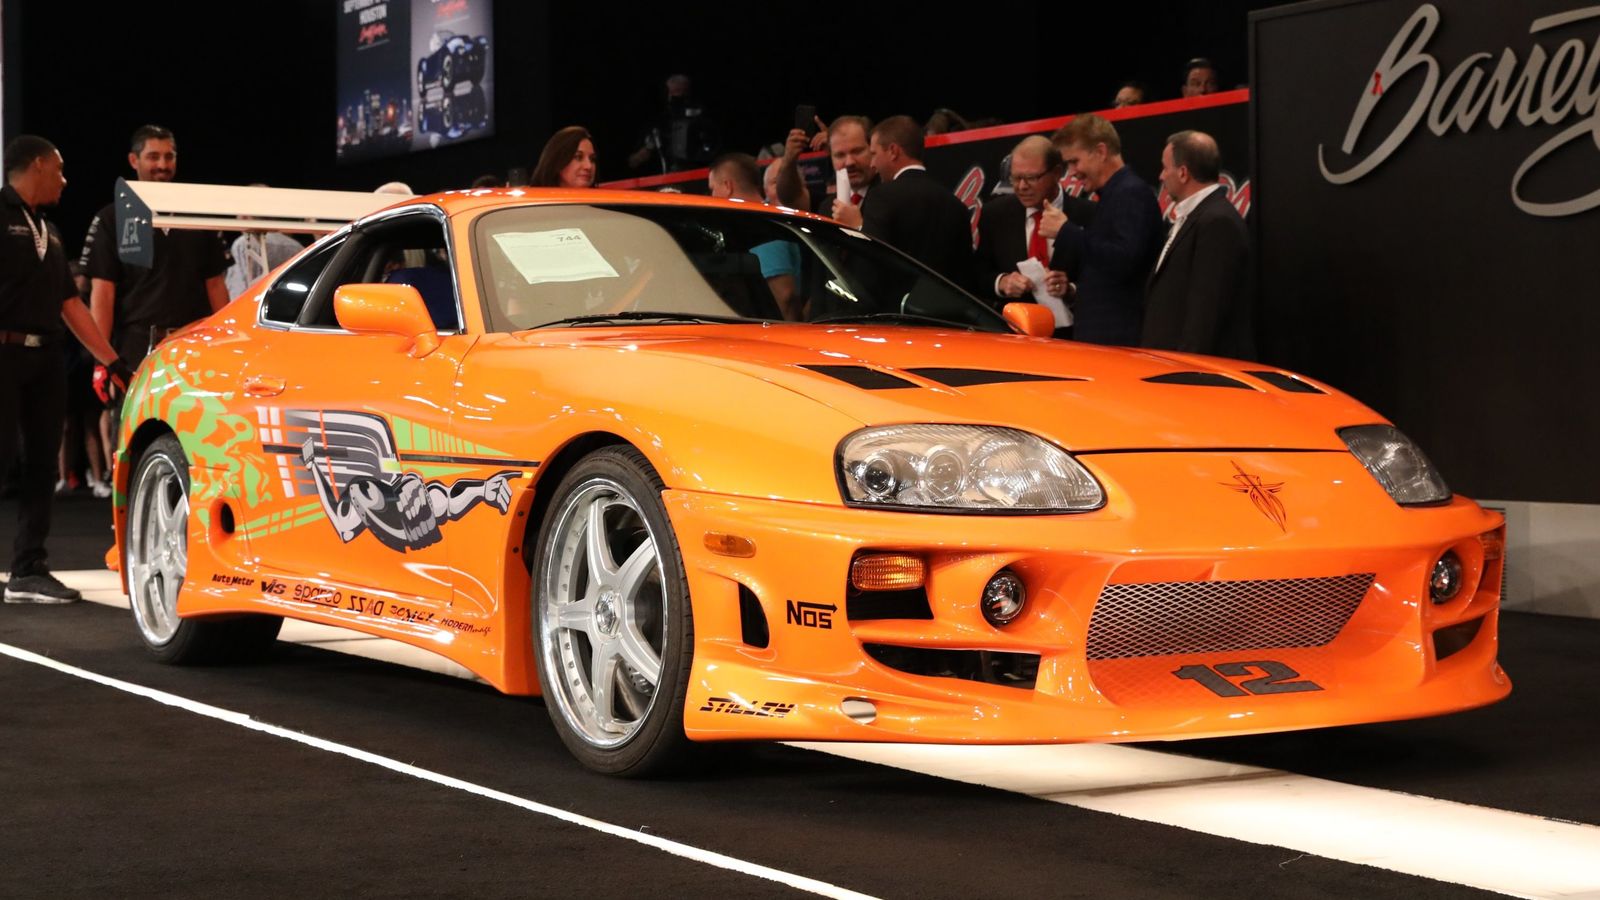 Paul Walker's 'Fast & Furious' Toyota Supra sells for over four crore rupees